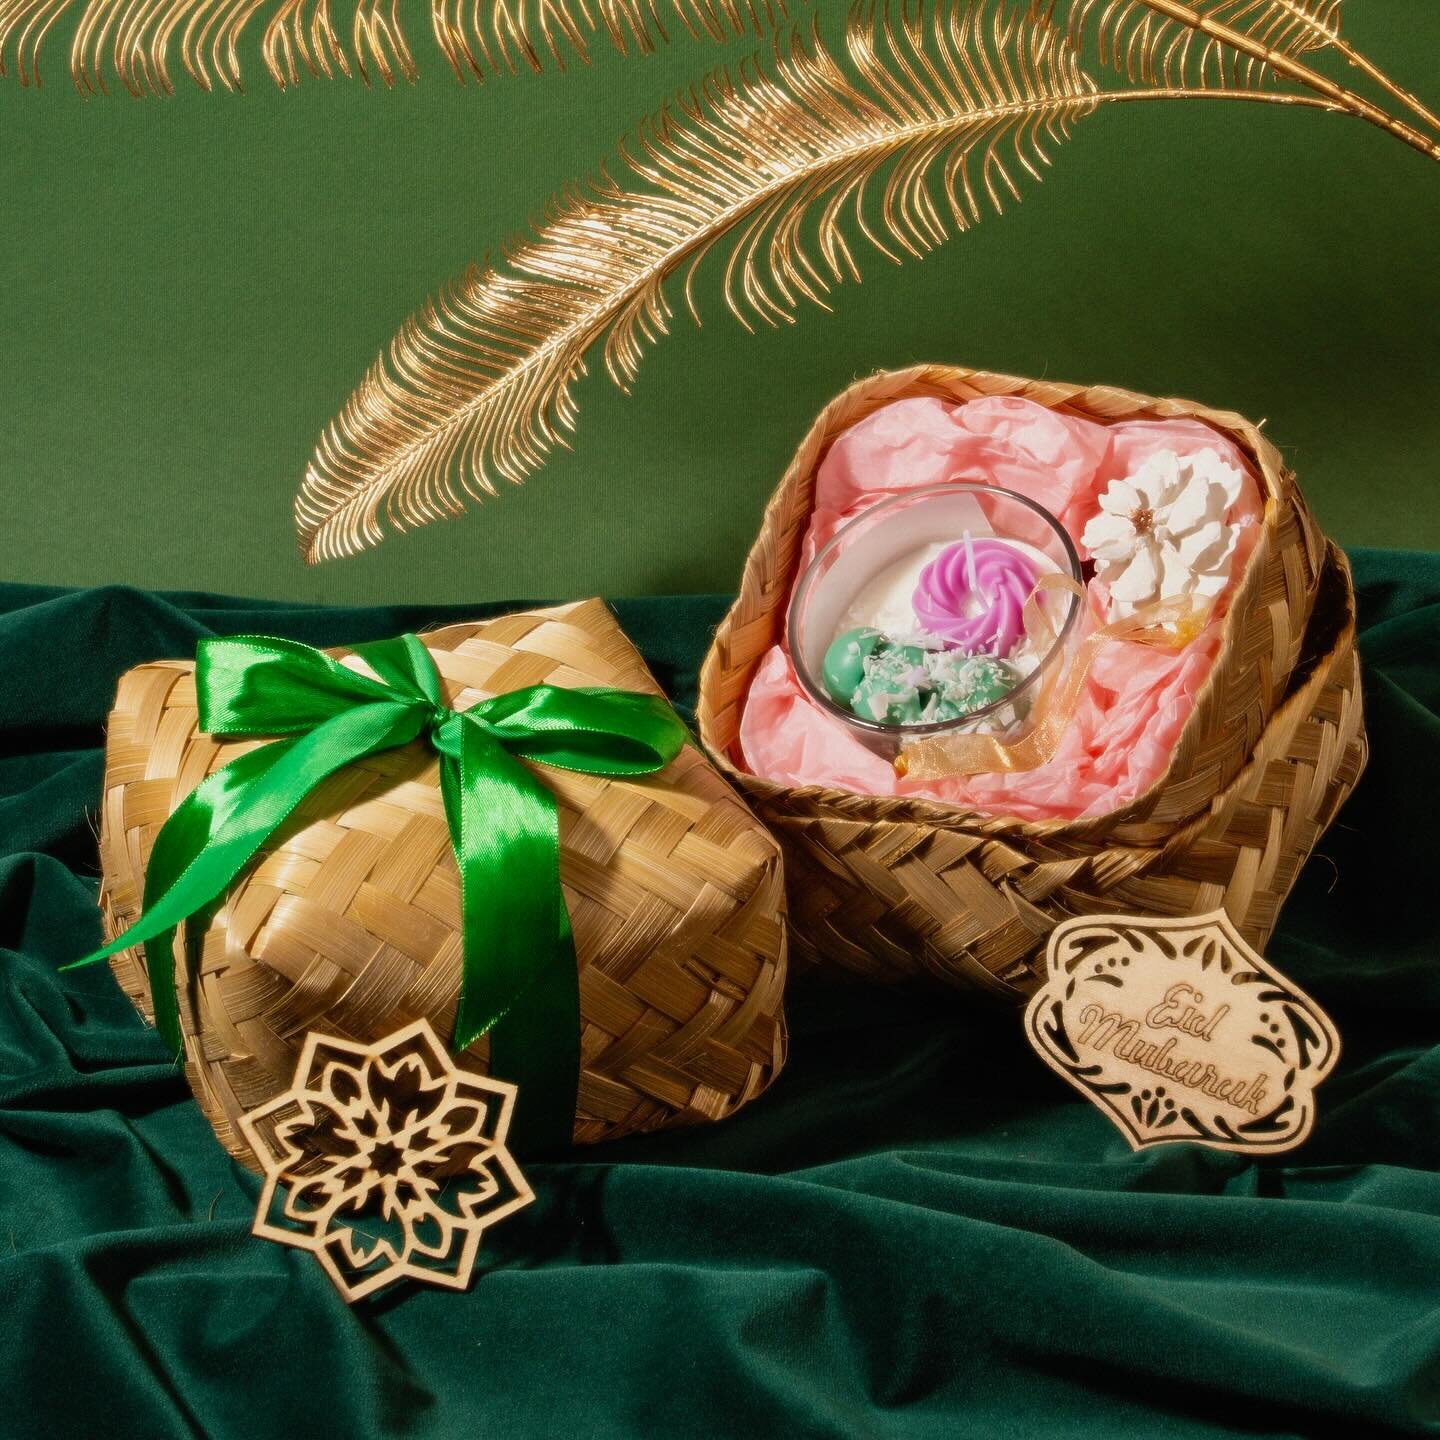 Nostalgic Minimalist Raya Gift Set &ndash; a compact essentials besek for your on-the-go celebrations. 

Curated for simplicity without compromising joy, it&rsquo;s sure to elevate your once-a-year festivities. Discover Zephyrie&rsquo;s signature Ray